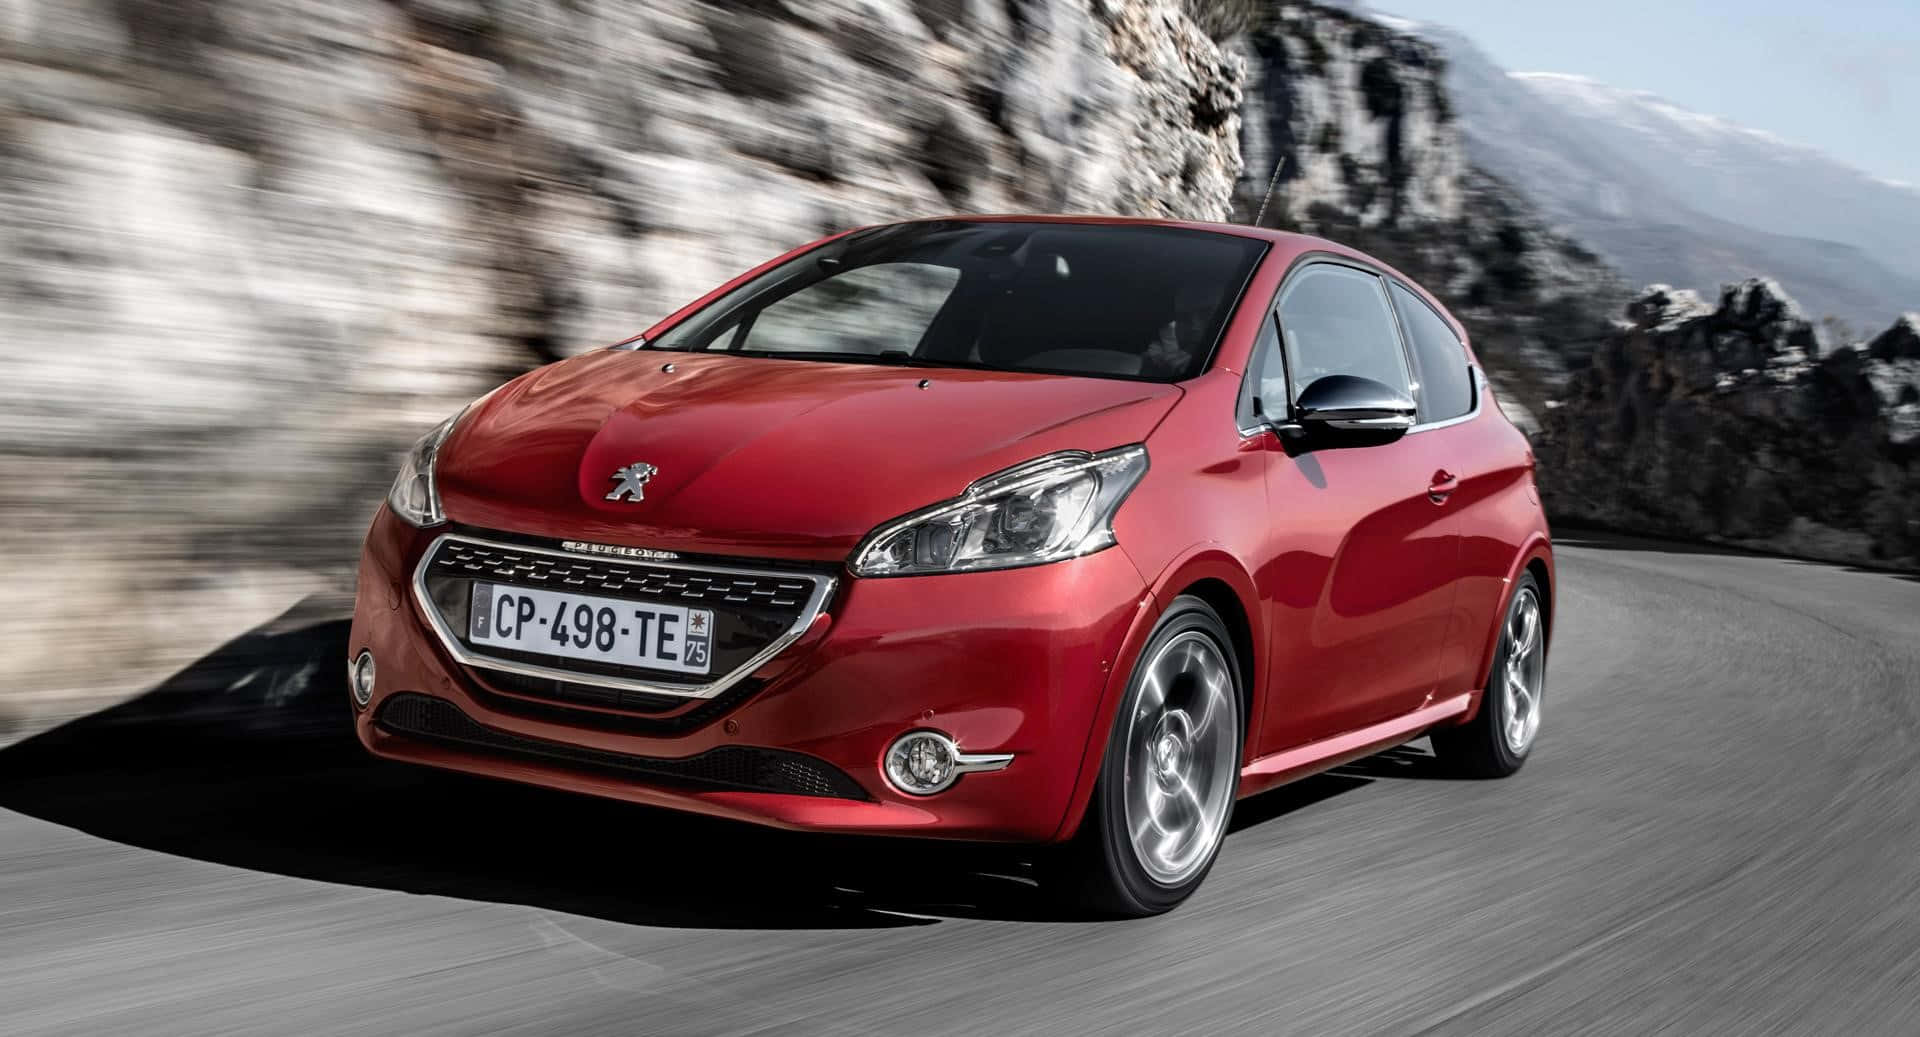 Captivating Peugeot 208 in Action Wallpaper